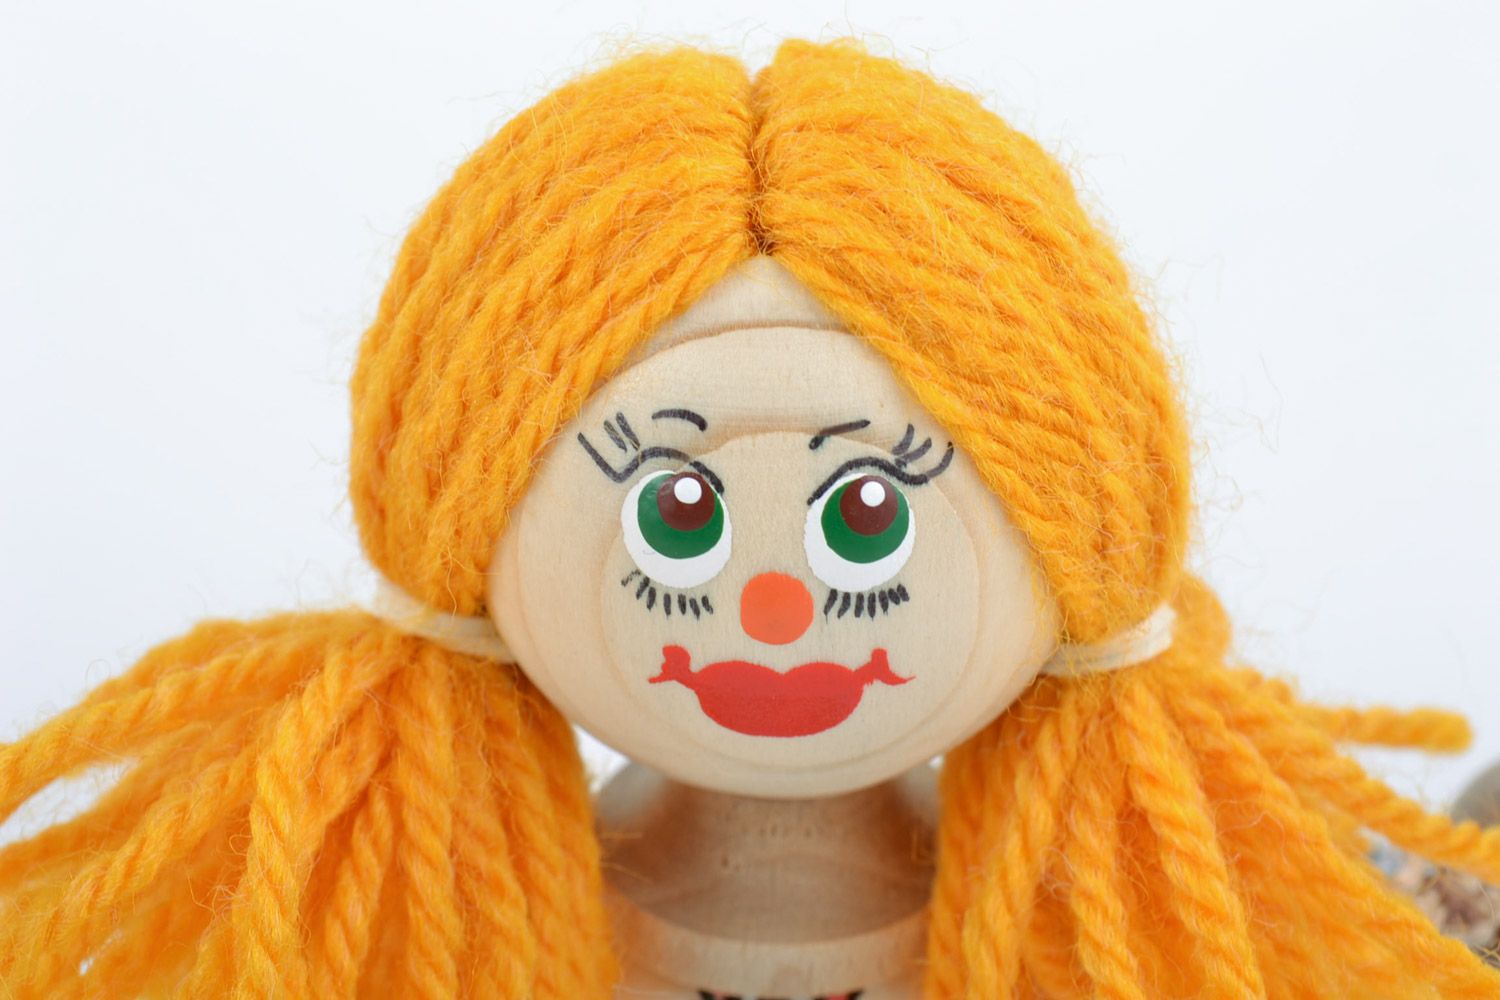 Handmade small painted wooden eco toy girl with bright yellow hair for kids photo 3